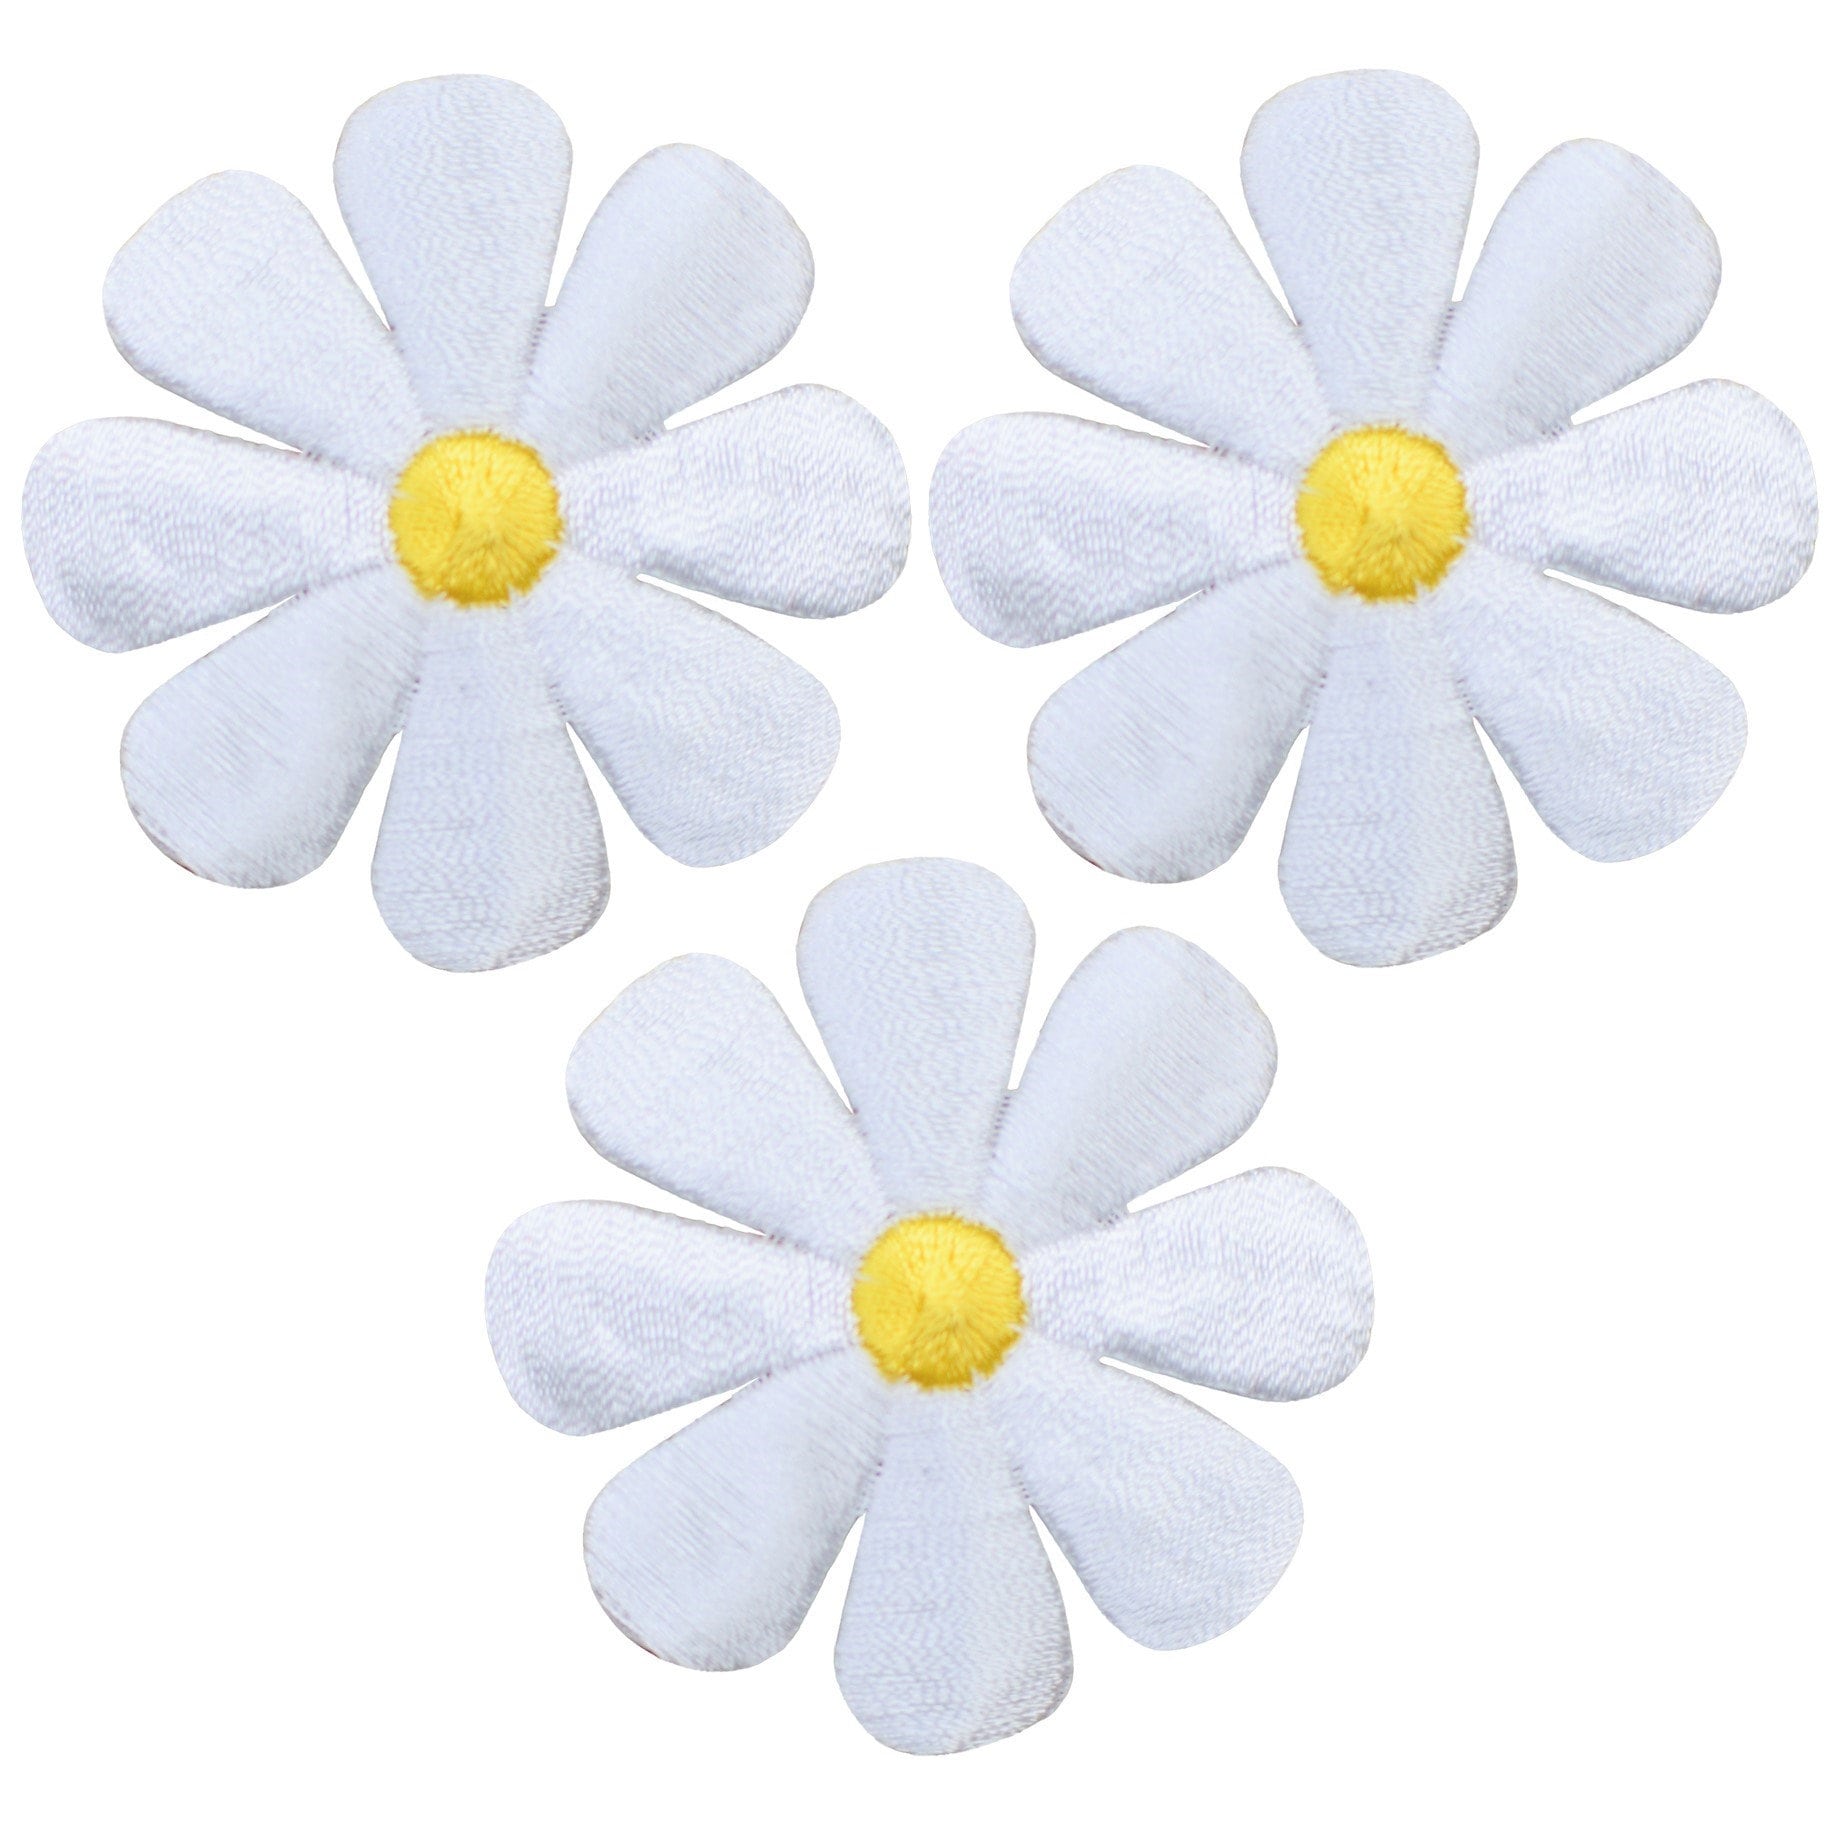 Buy 10PCS Cute Small Flower Patches Embroidery Iron On Applique Floral for  Kids Bags Dress Online